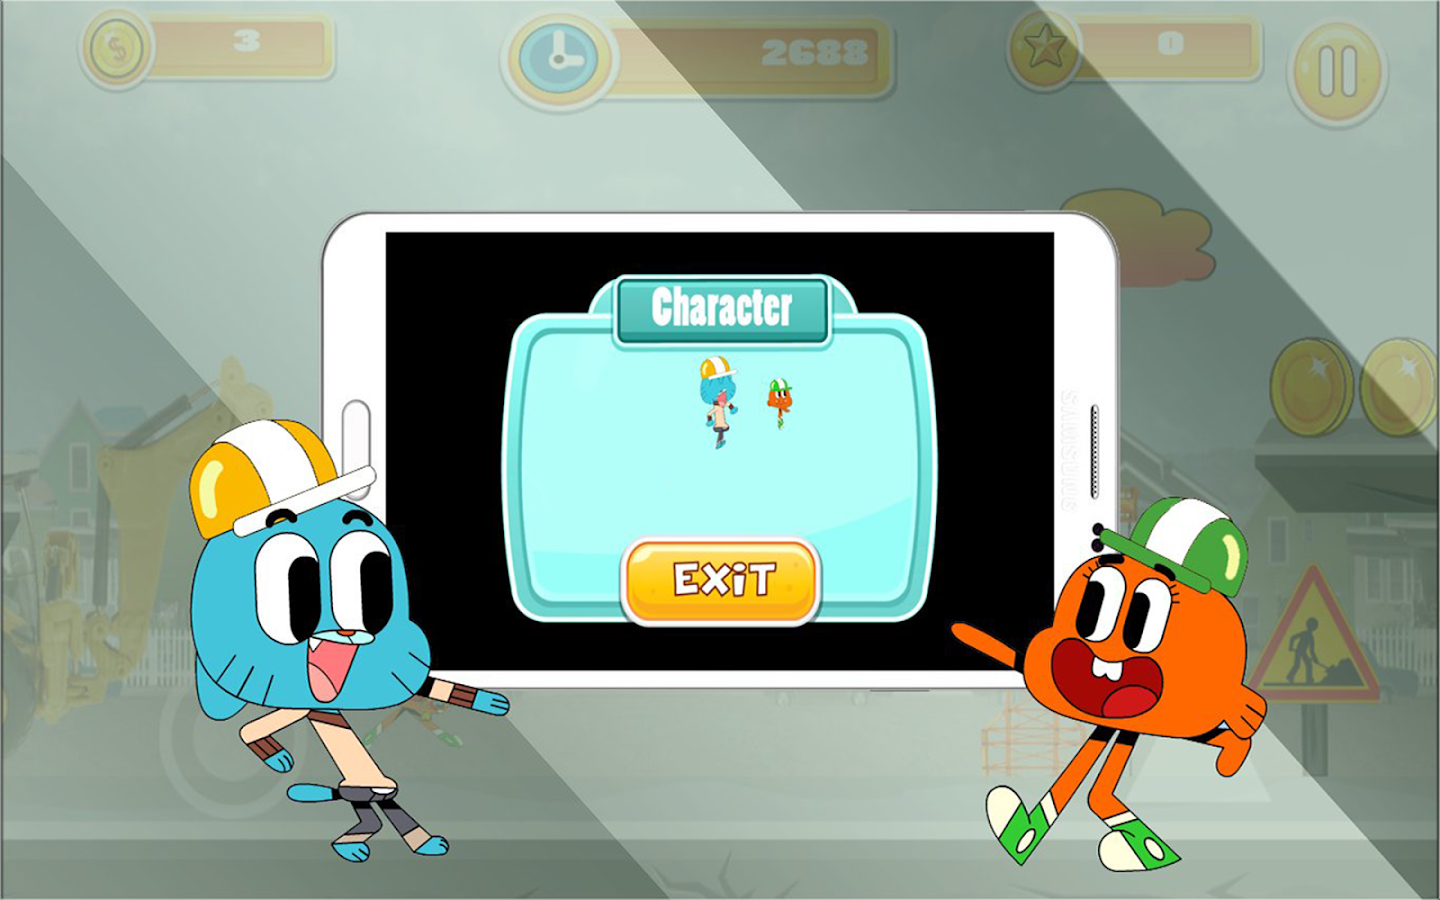 Gumbol Vs Robot 12 Apk Download Android Adventure Games - download get free robux and tips for robl0x 2019 116apk